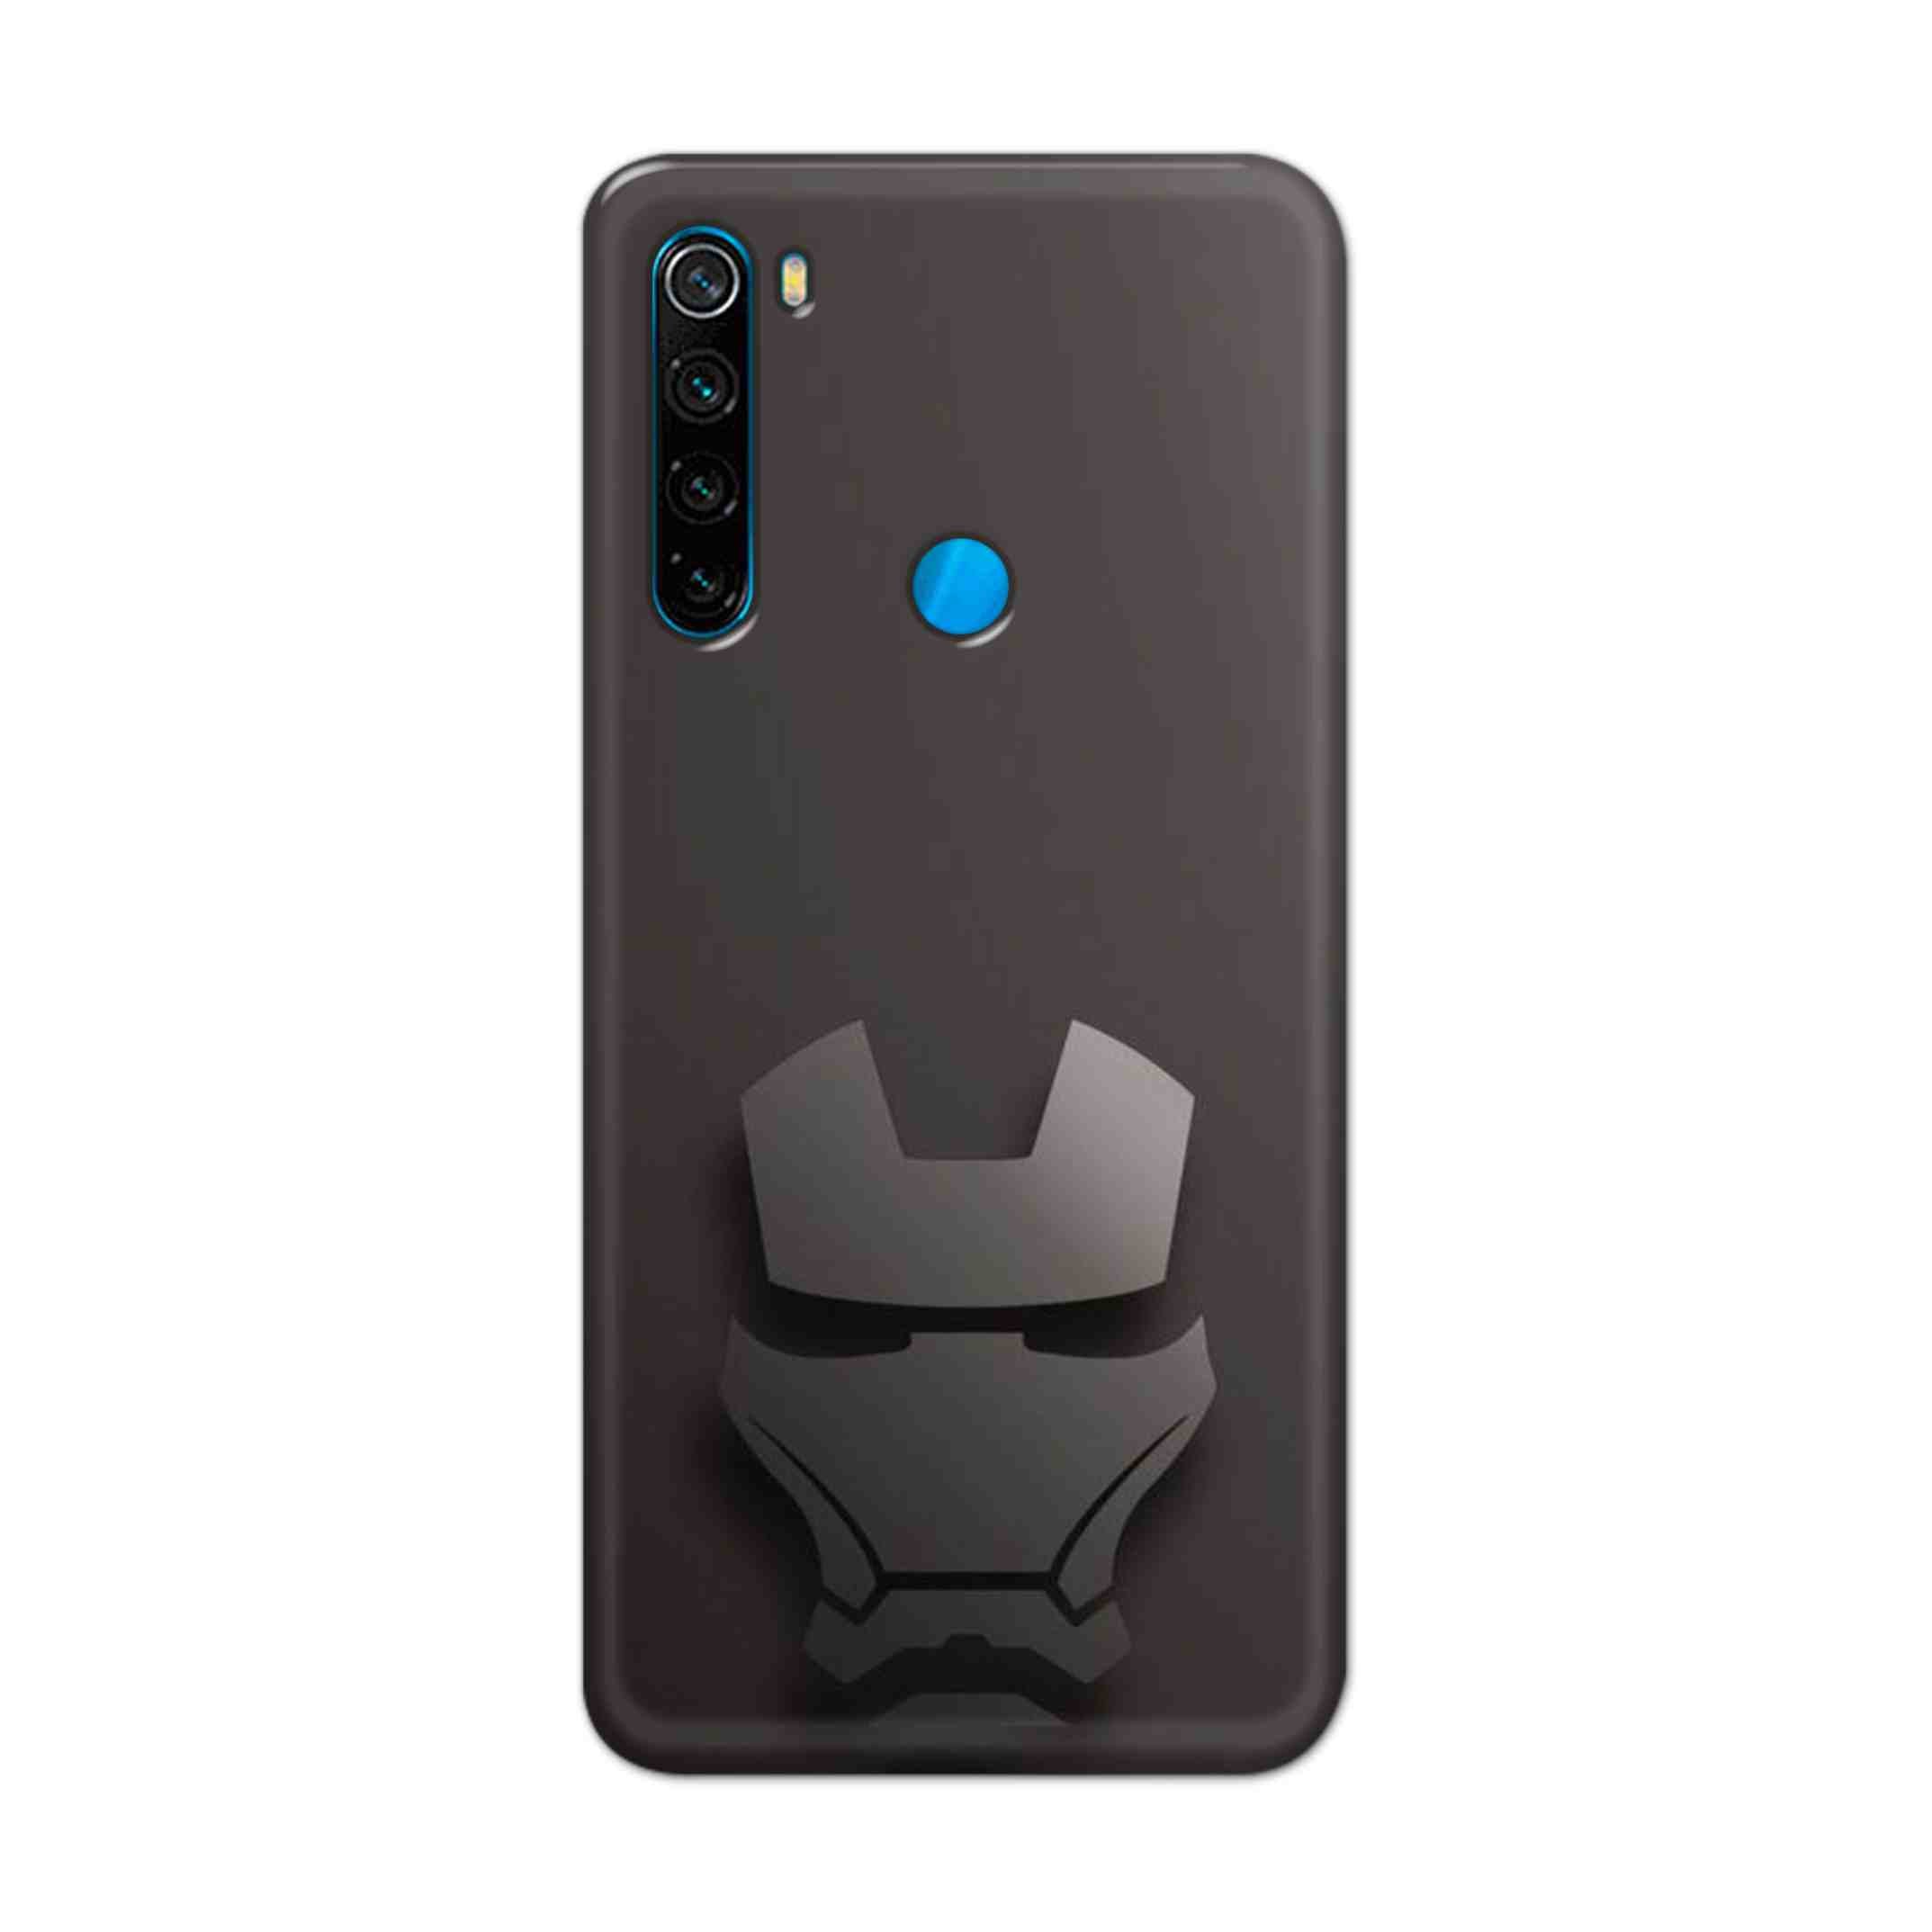 Buy Iron Man Logo Hard Back Mobile Phone Case Cover For Xiaomi Redmi Note 8 Online